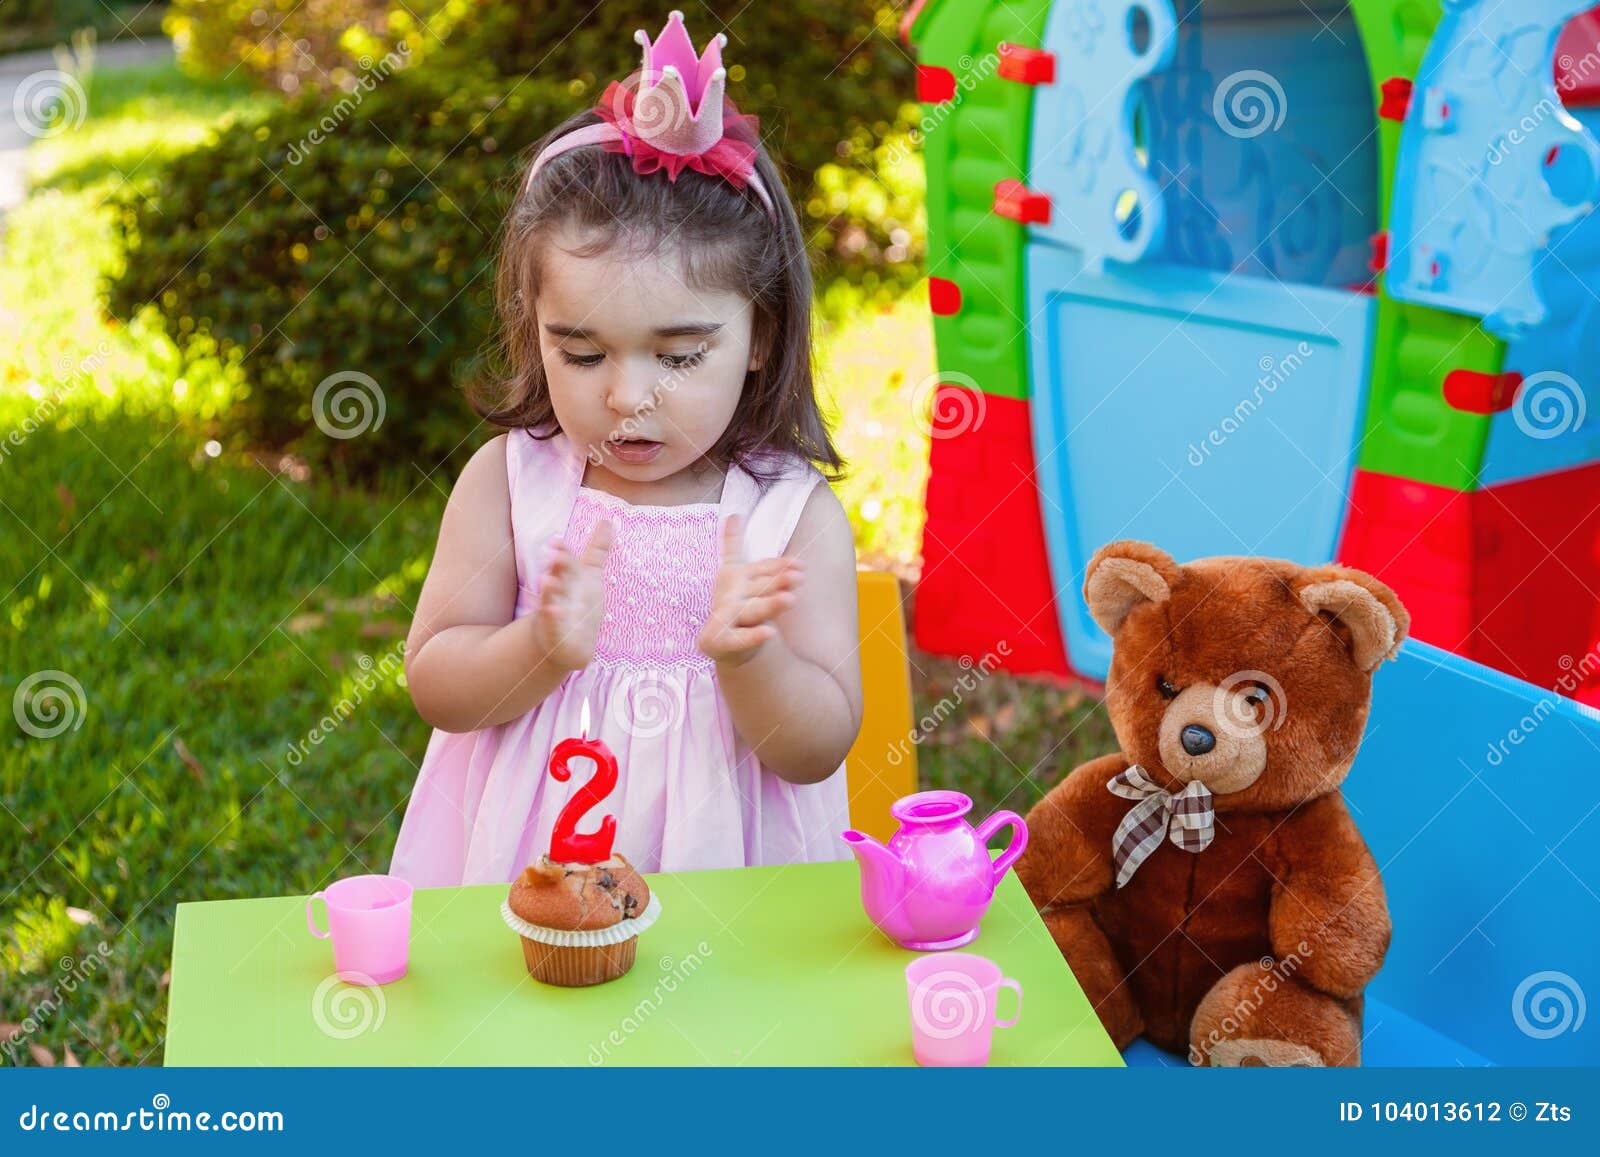 Baby Toddler Girl In Outdoor Second Birthday Party Clapping Hands At Cake With Teddy Bear As Best Friend Stock Photo Image Of Infant Female 104013612